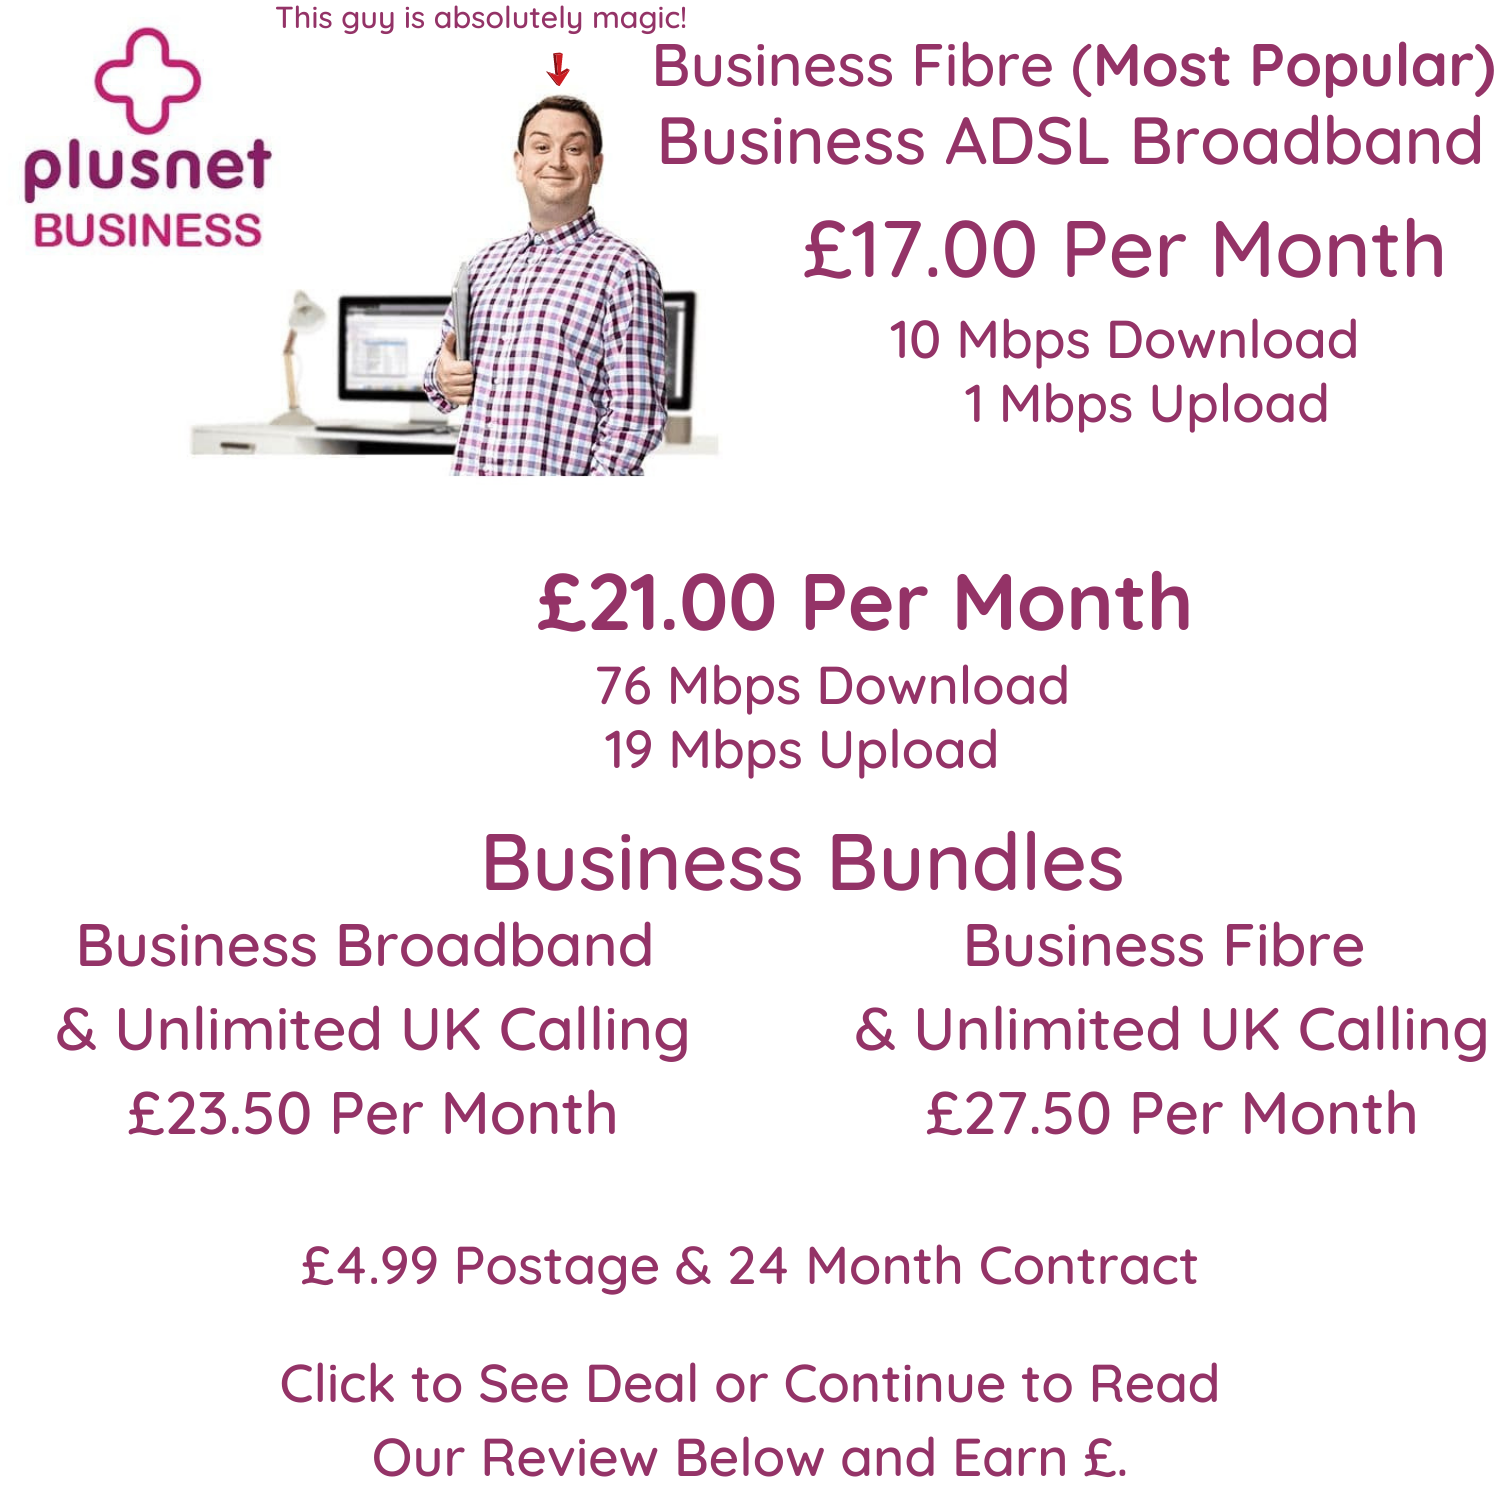 Plusnet Business Broadband from £17 per month for ADSL 10 Mbps download speeds and 1 Mbps upload speeds or £21.00 per month for business fibre with 76 Mbps download speeds and 19 Mbps upload speeds.